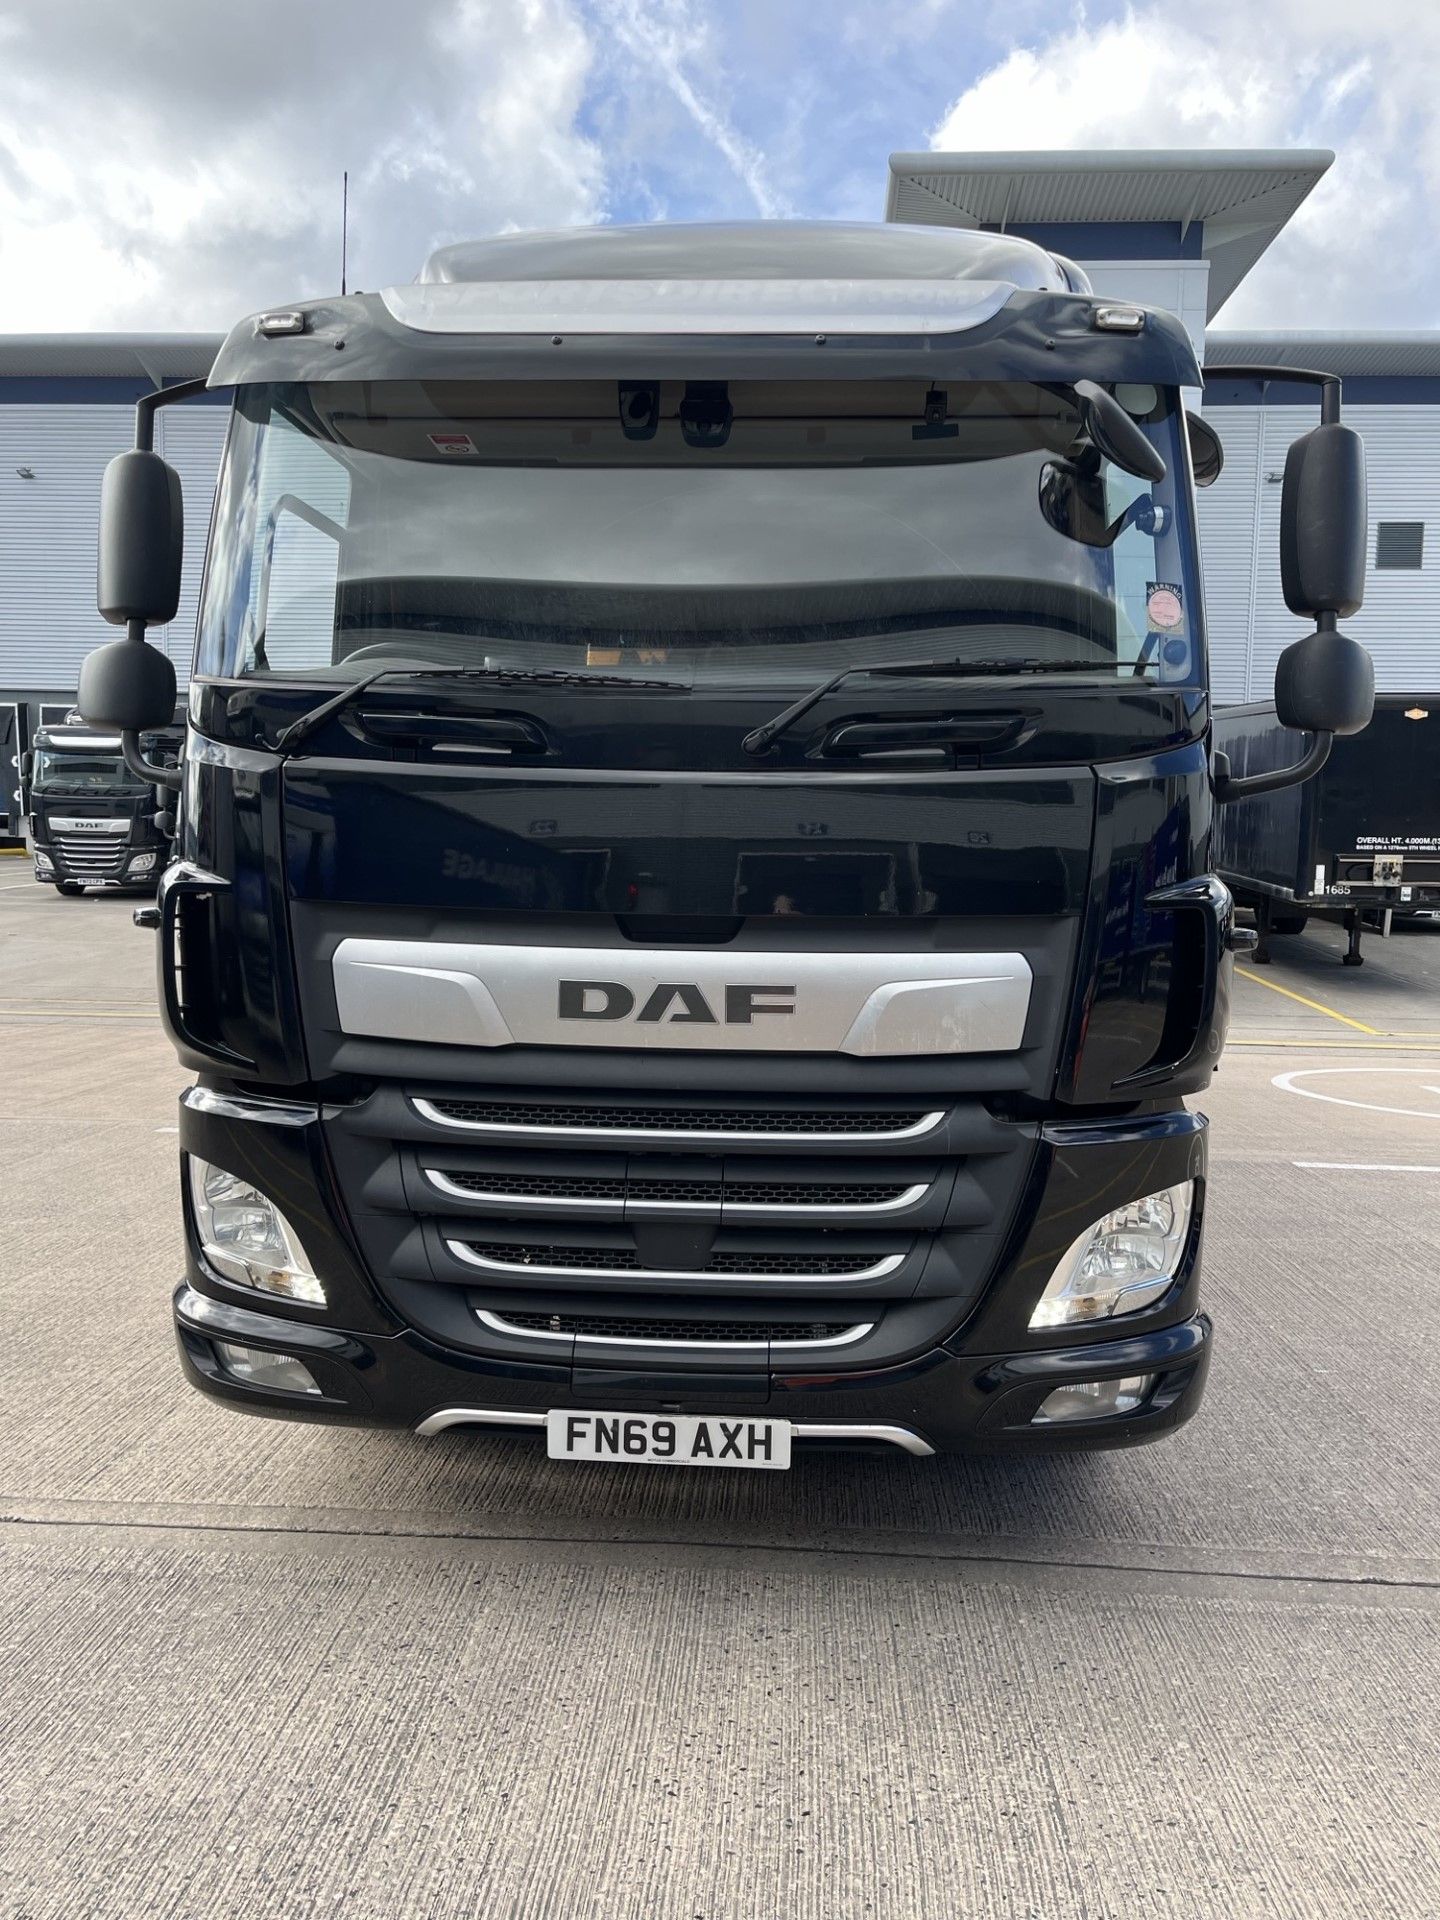 2019, DAF CF 260 FA (Ex-Fleet Owned & Maintained) - FN69 AXH (18 Ton Rigid Truck with Tail Lift) - Bild 3 aus 22